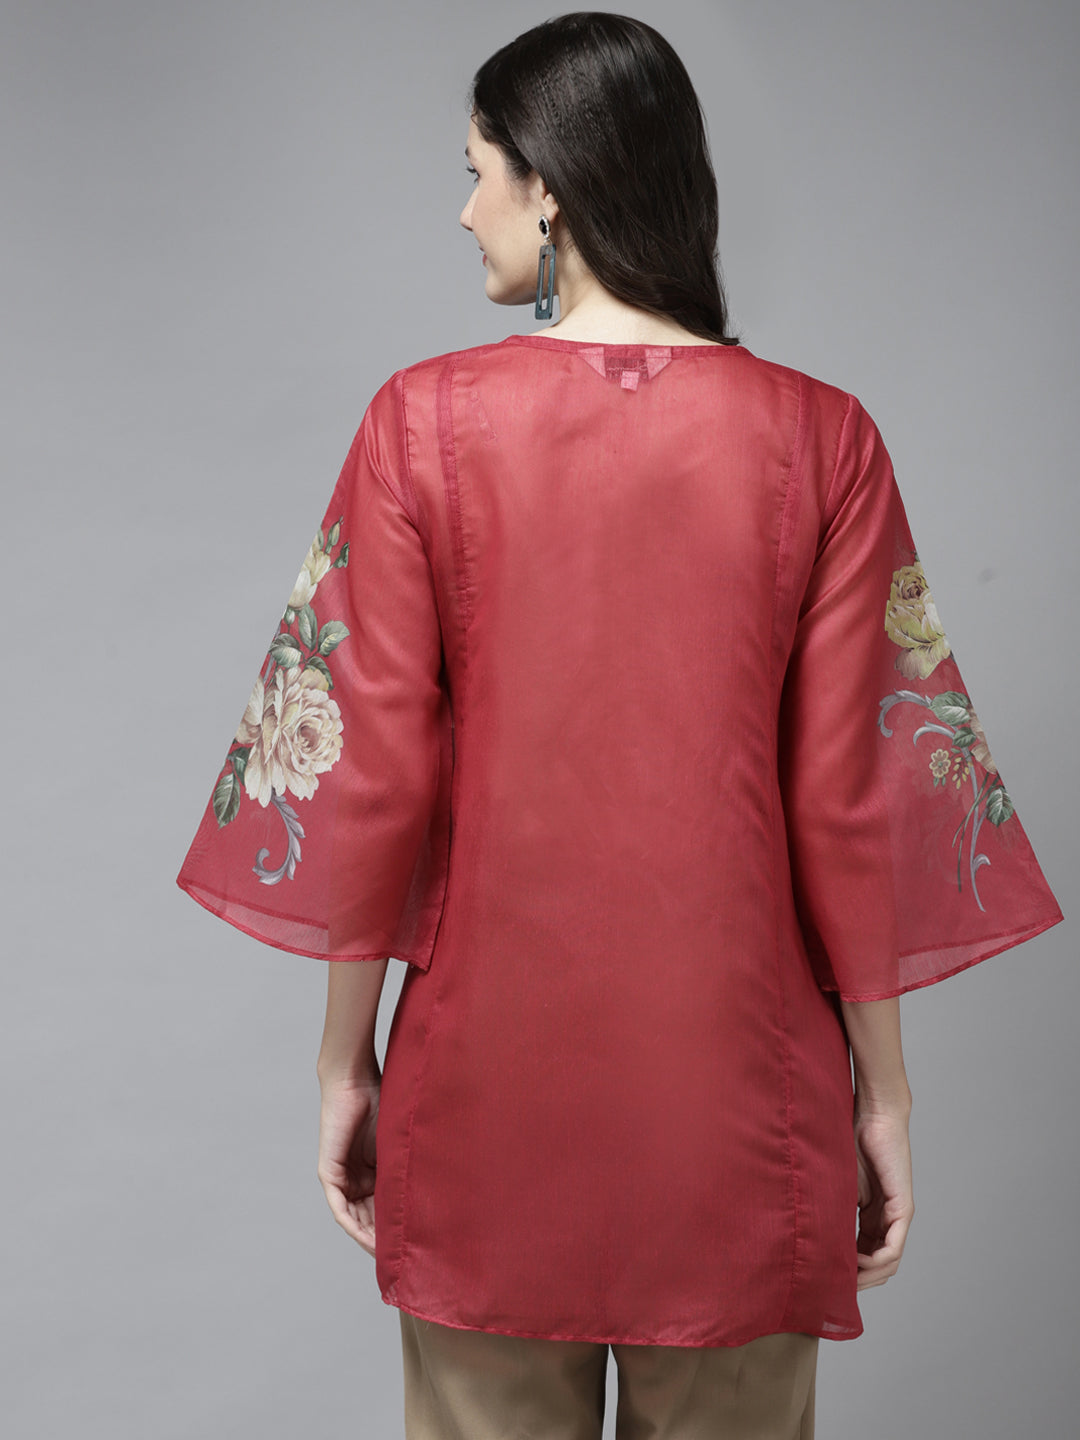 Bhama Couture Red Printed A-Line Tunic